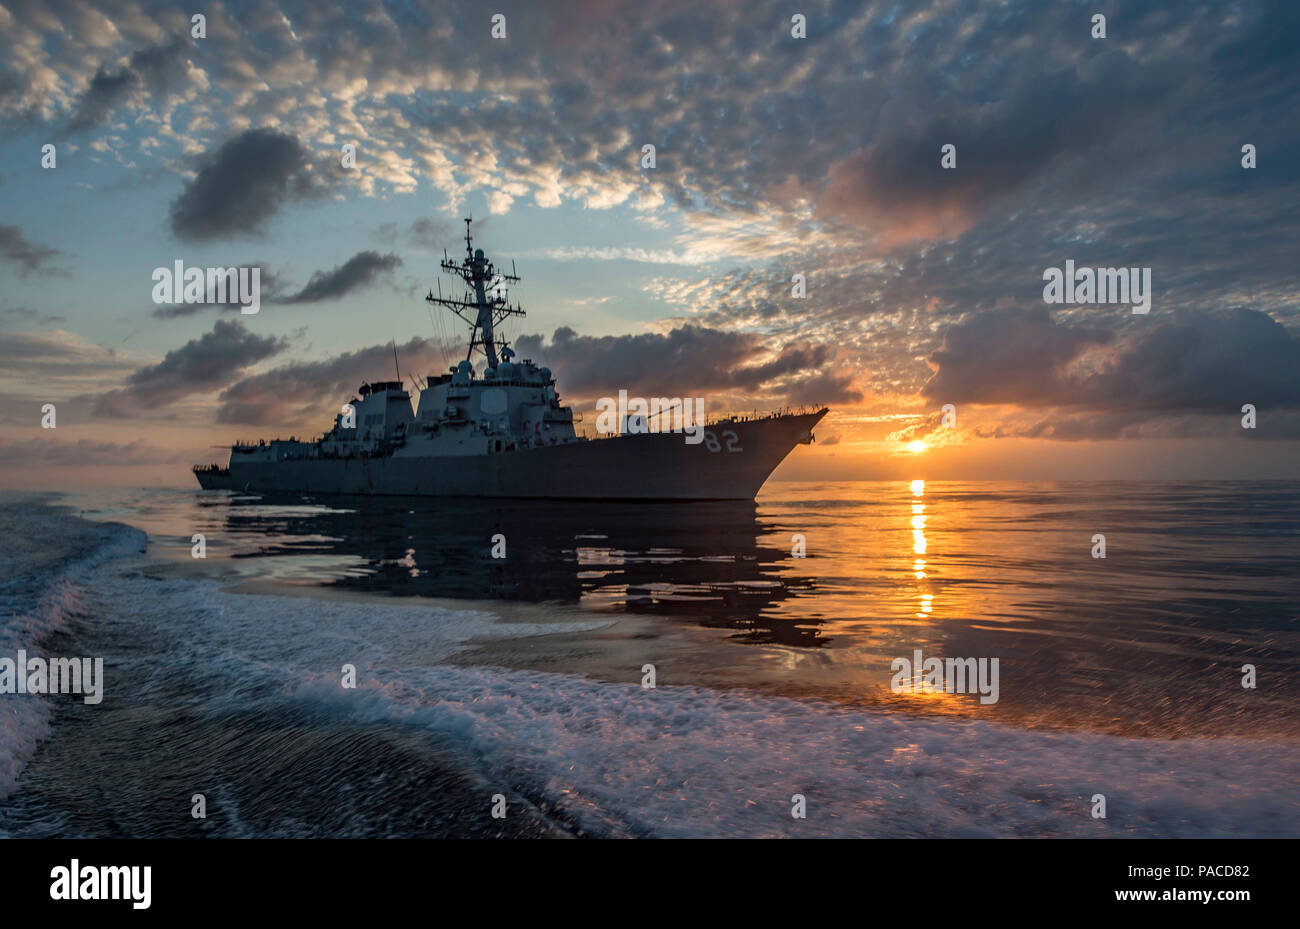 160310-N-MD297-161 PACIFIC OCEAN (March 10, 2016) Arleigh Burke-class guided-missile destroyer USS Lassen (DDG 82) patrols the Eastern Pacific. Lassen is currently underway in support of Operation Martillo, a joint operation with the U.S. Coast Guard and partner nations within the 4th Fleet area of responsibility. (U.S. Navy photo by Mass Communication Specialist 2nd Class Huey D. Younger Jr./Released) Stock Photo